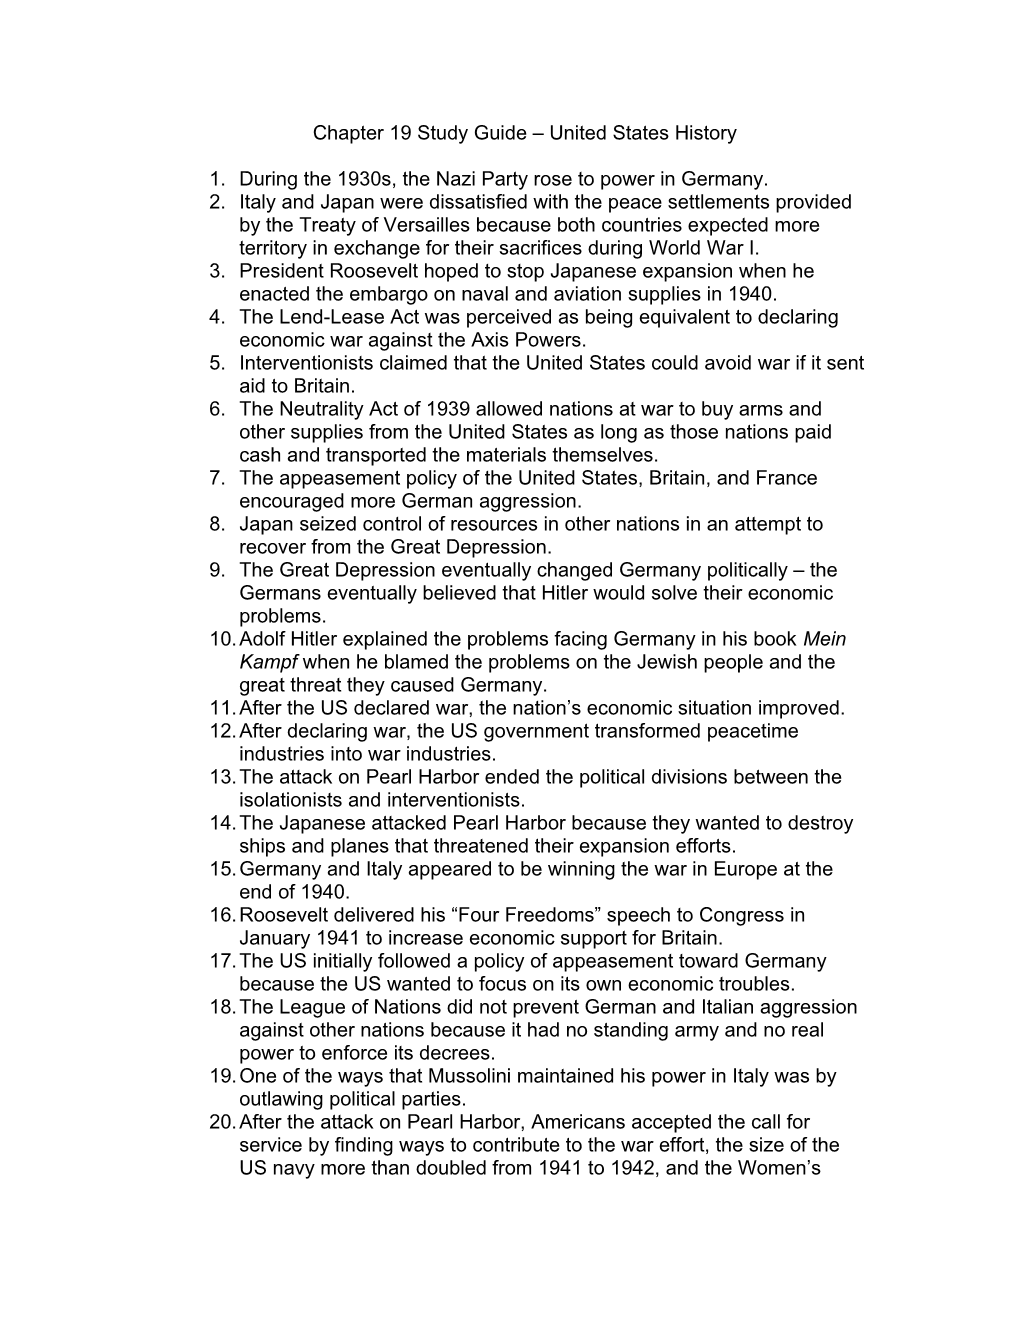 Chapter 19 Study Guide United States History